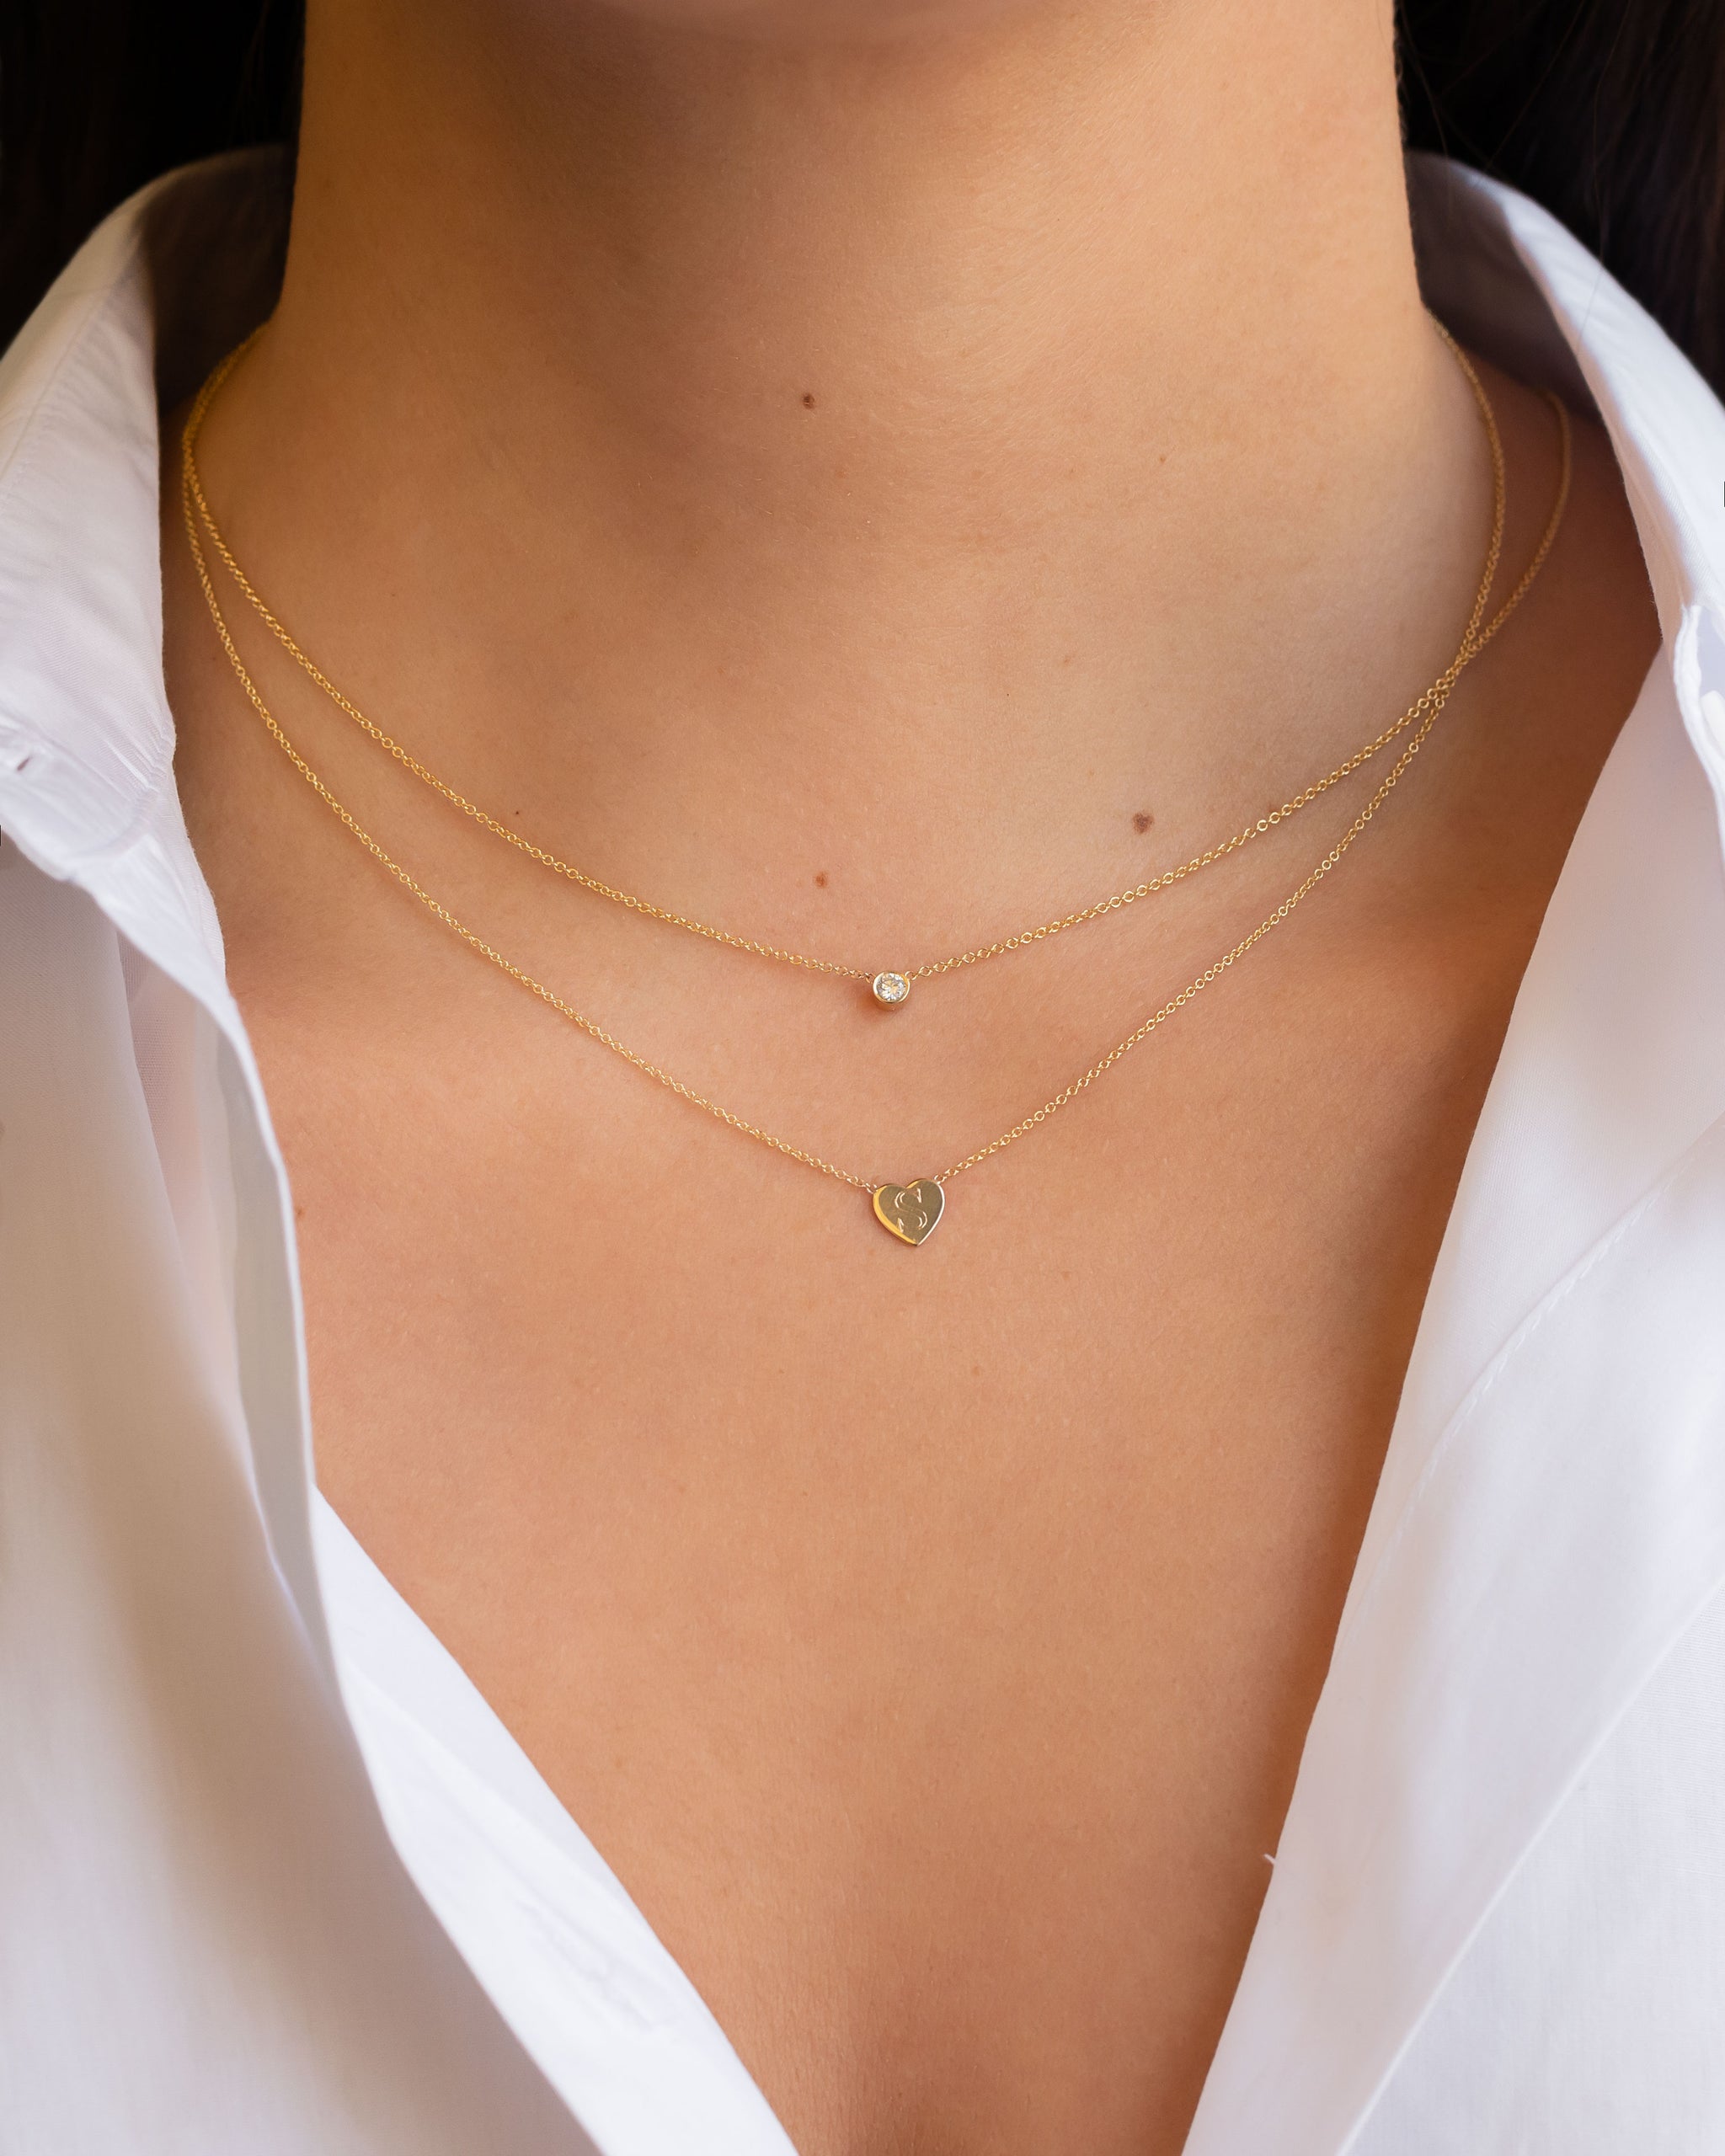 Buy Simple Double Heart Necklace, Dainty Heart Link Necklace